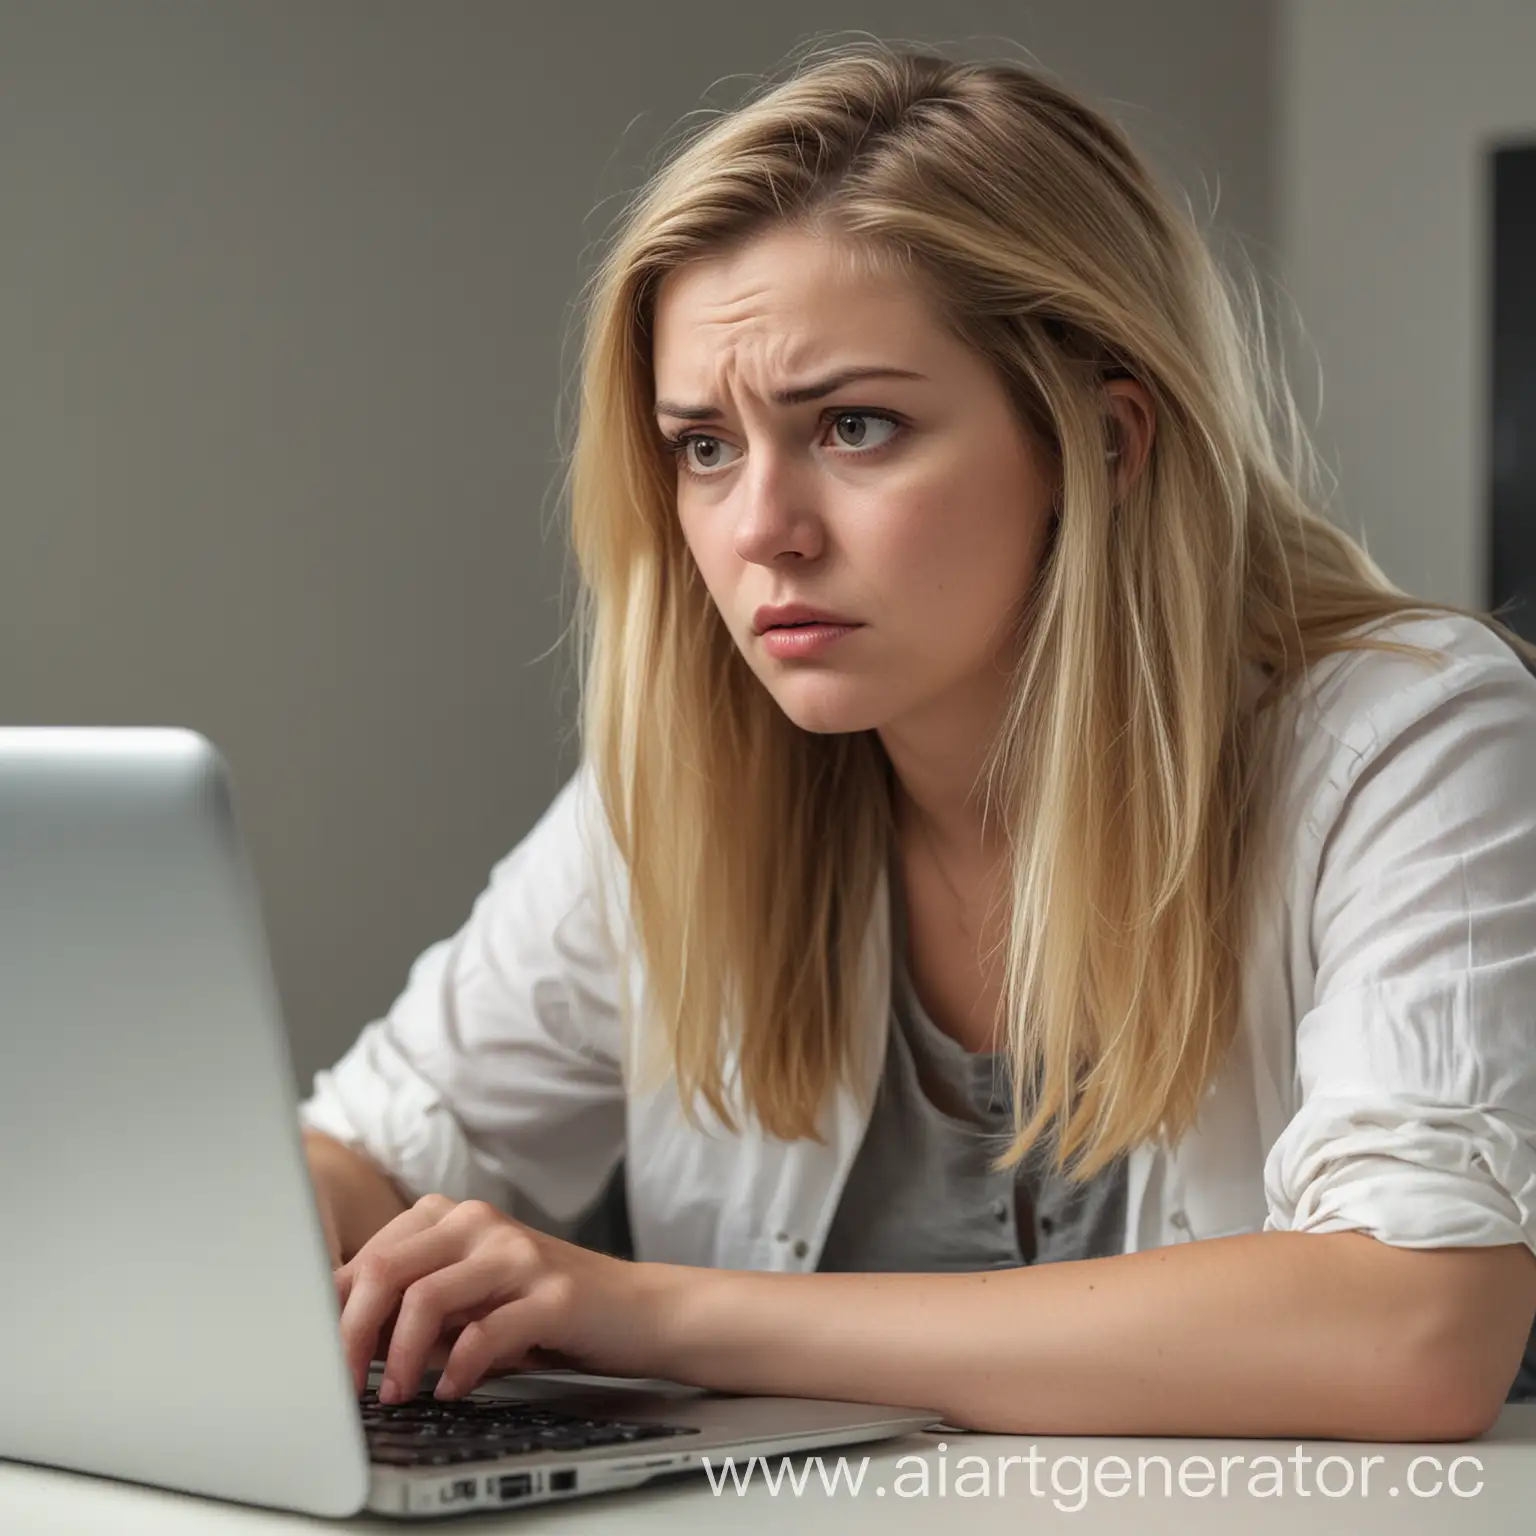 A white female is looking at the computer. She is unhappy.